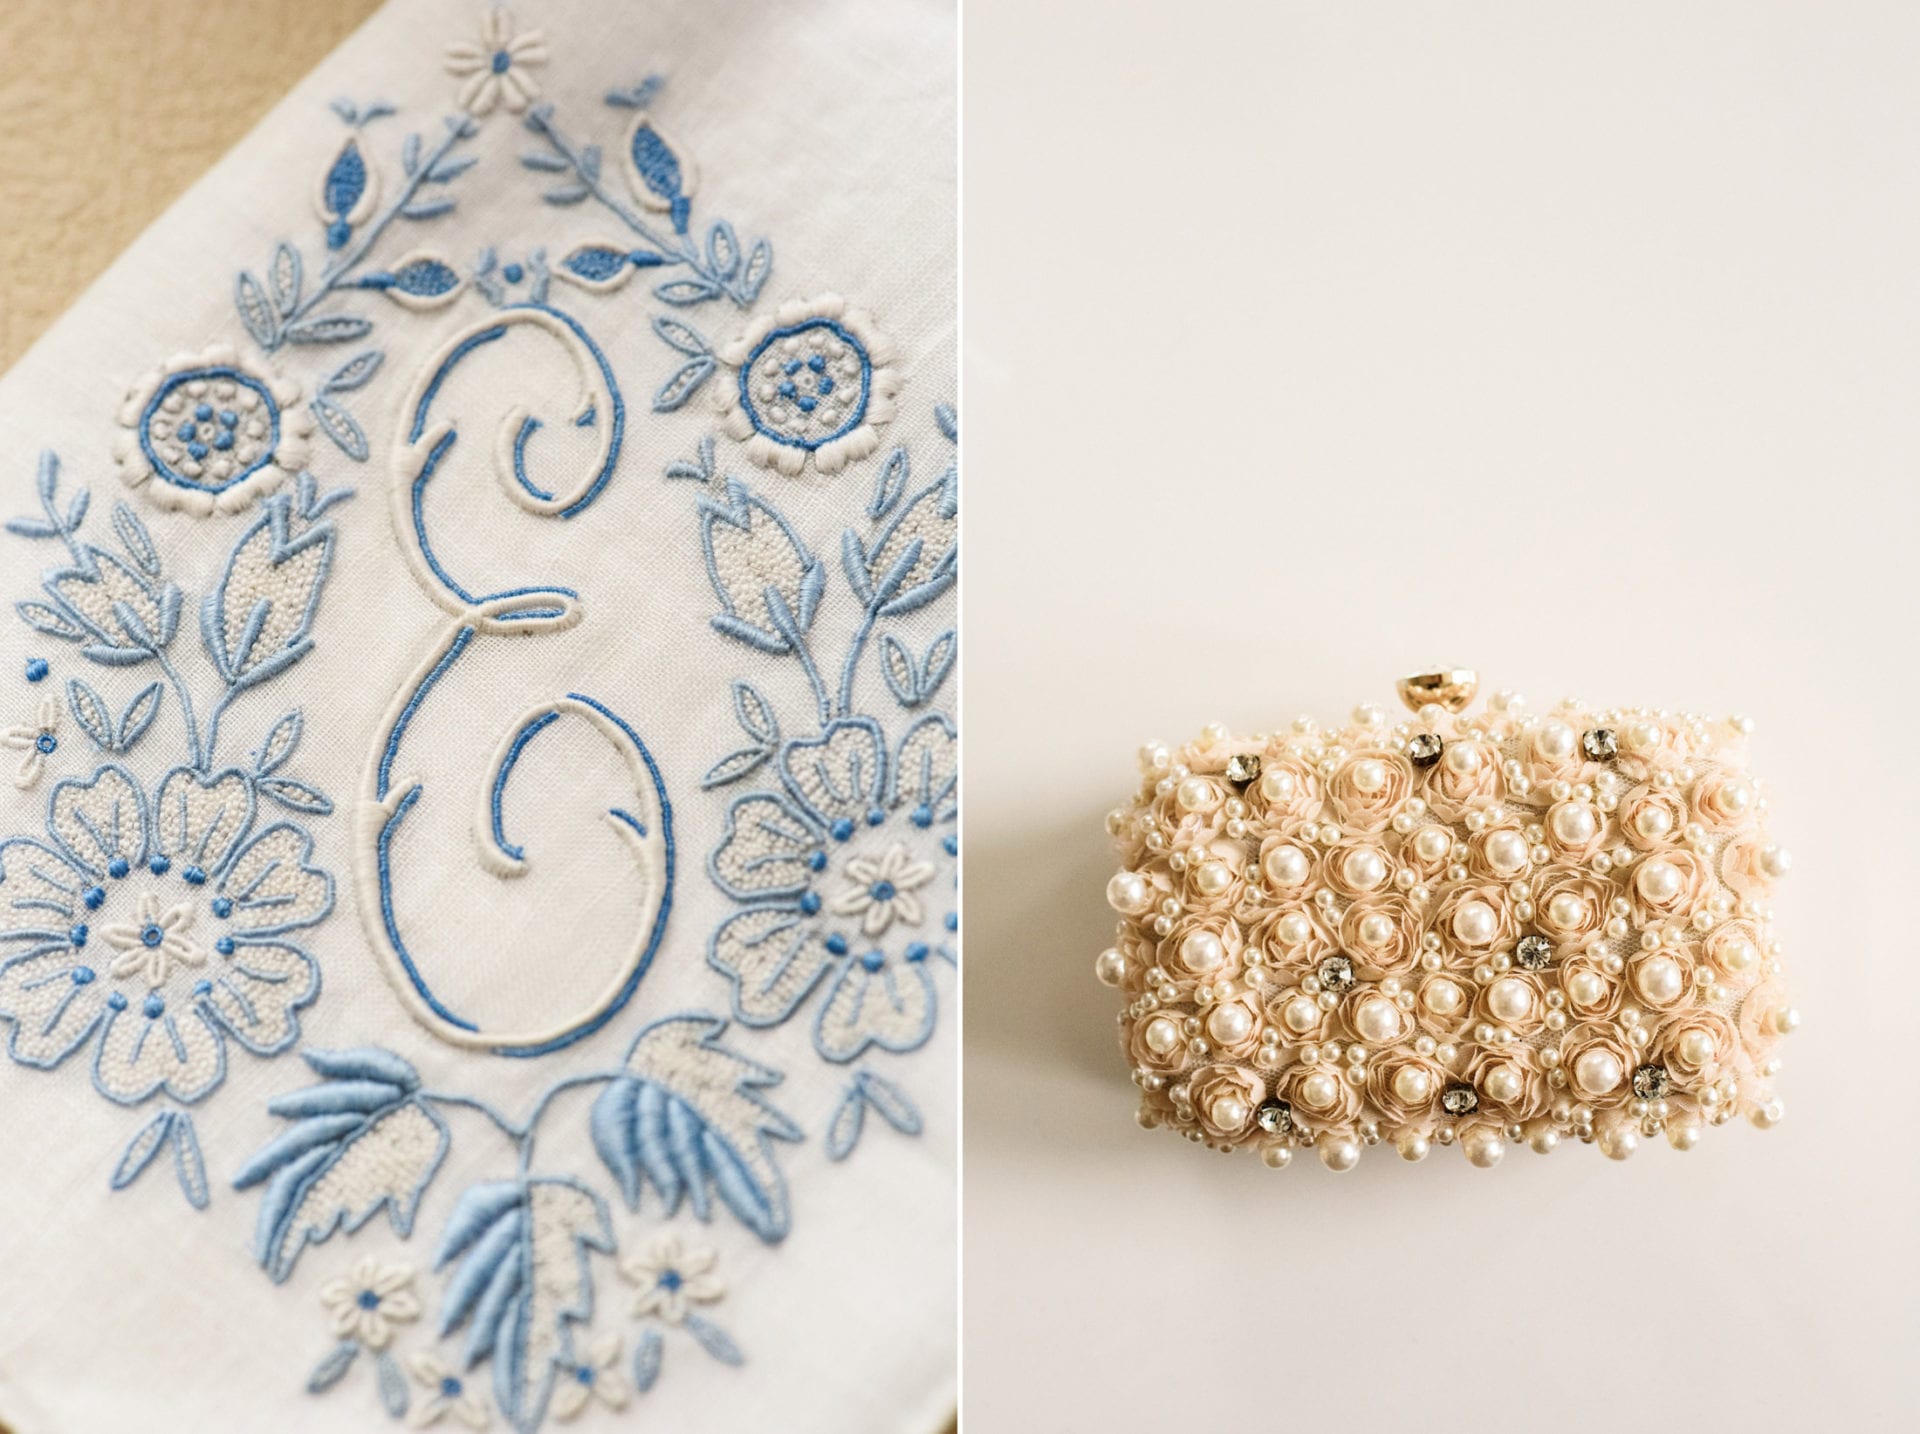 Two photos: First one is an embroidered handkerchief with blue and white flowers surrounding the letter E. The second is a clutch handbag with pearls, crystals and silk flowers.